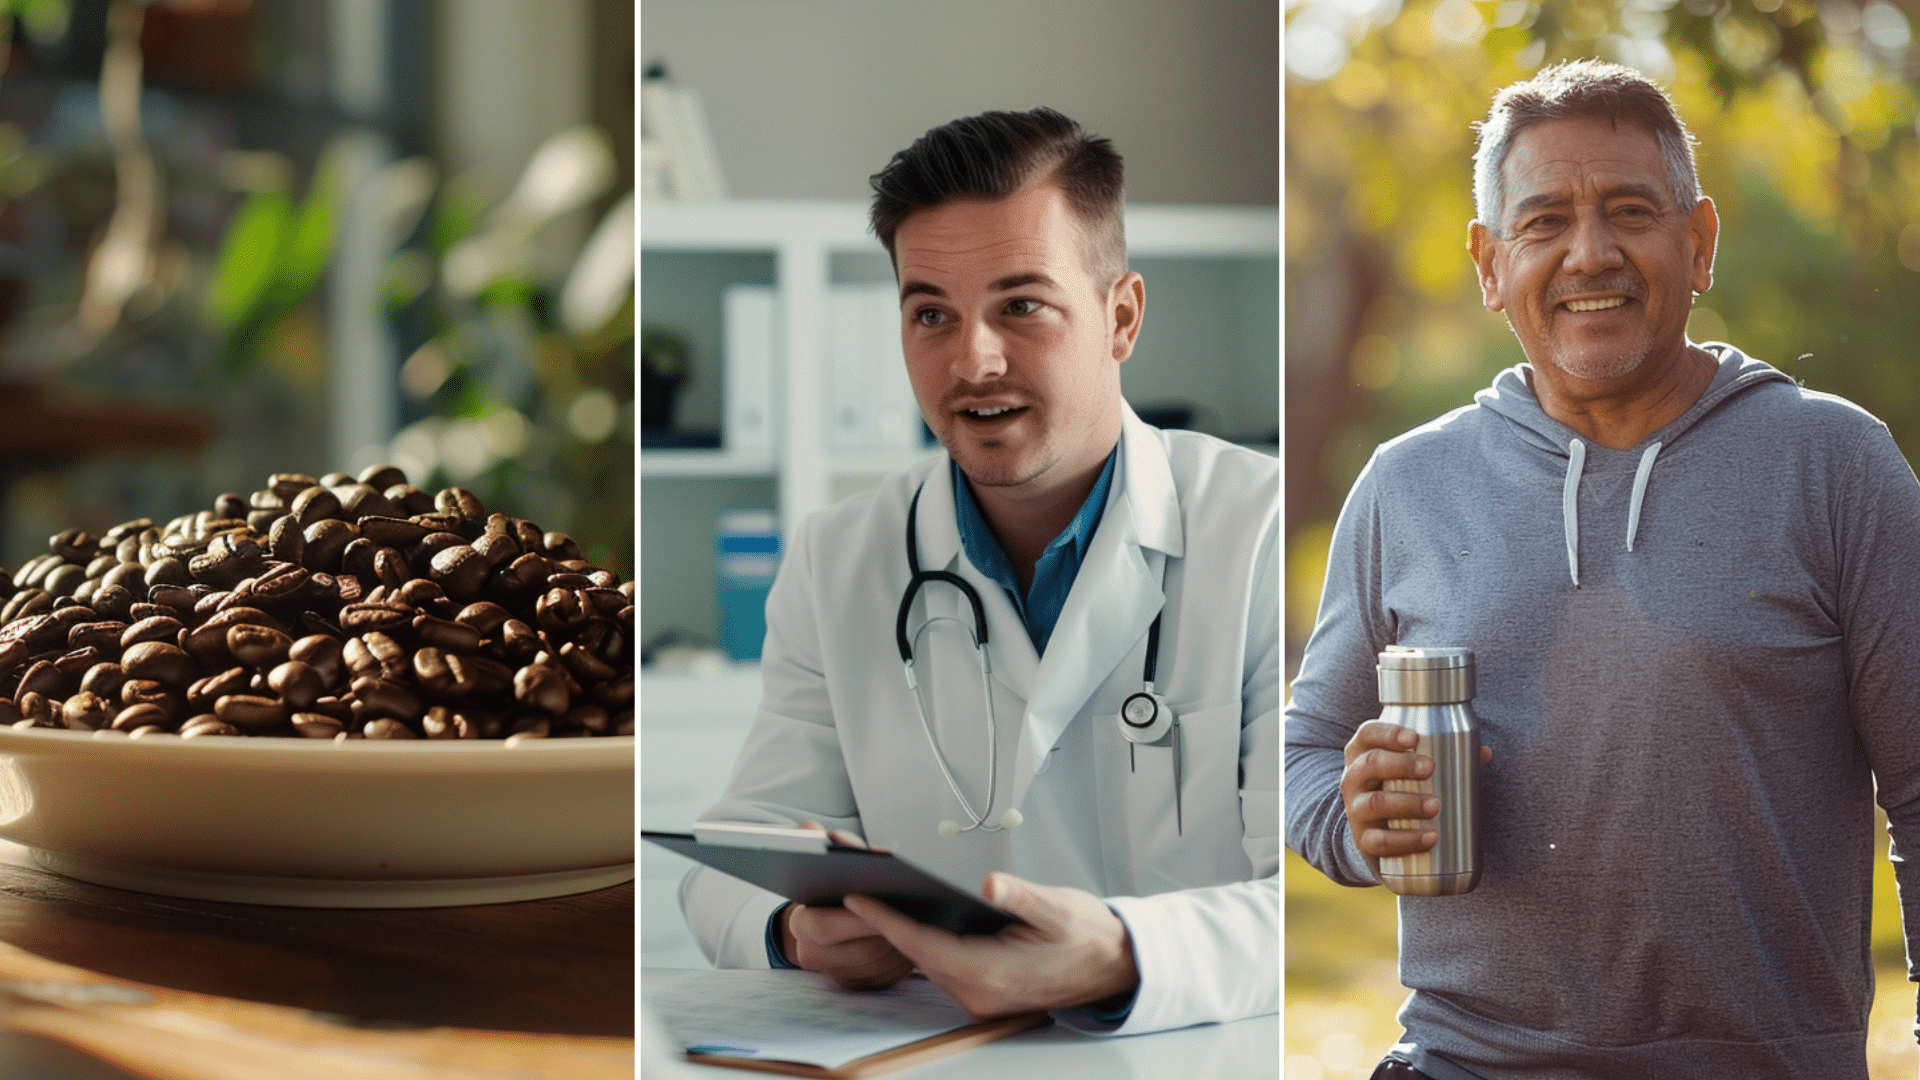 an image of gut microbiome, a glucoman, and a doctor an image of cheese and a man playing tennis an image of coffee beans